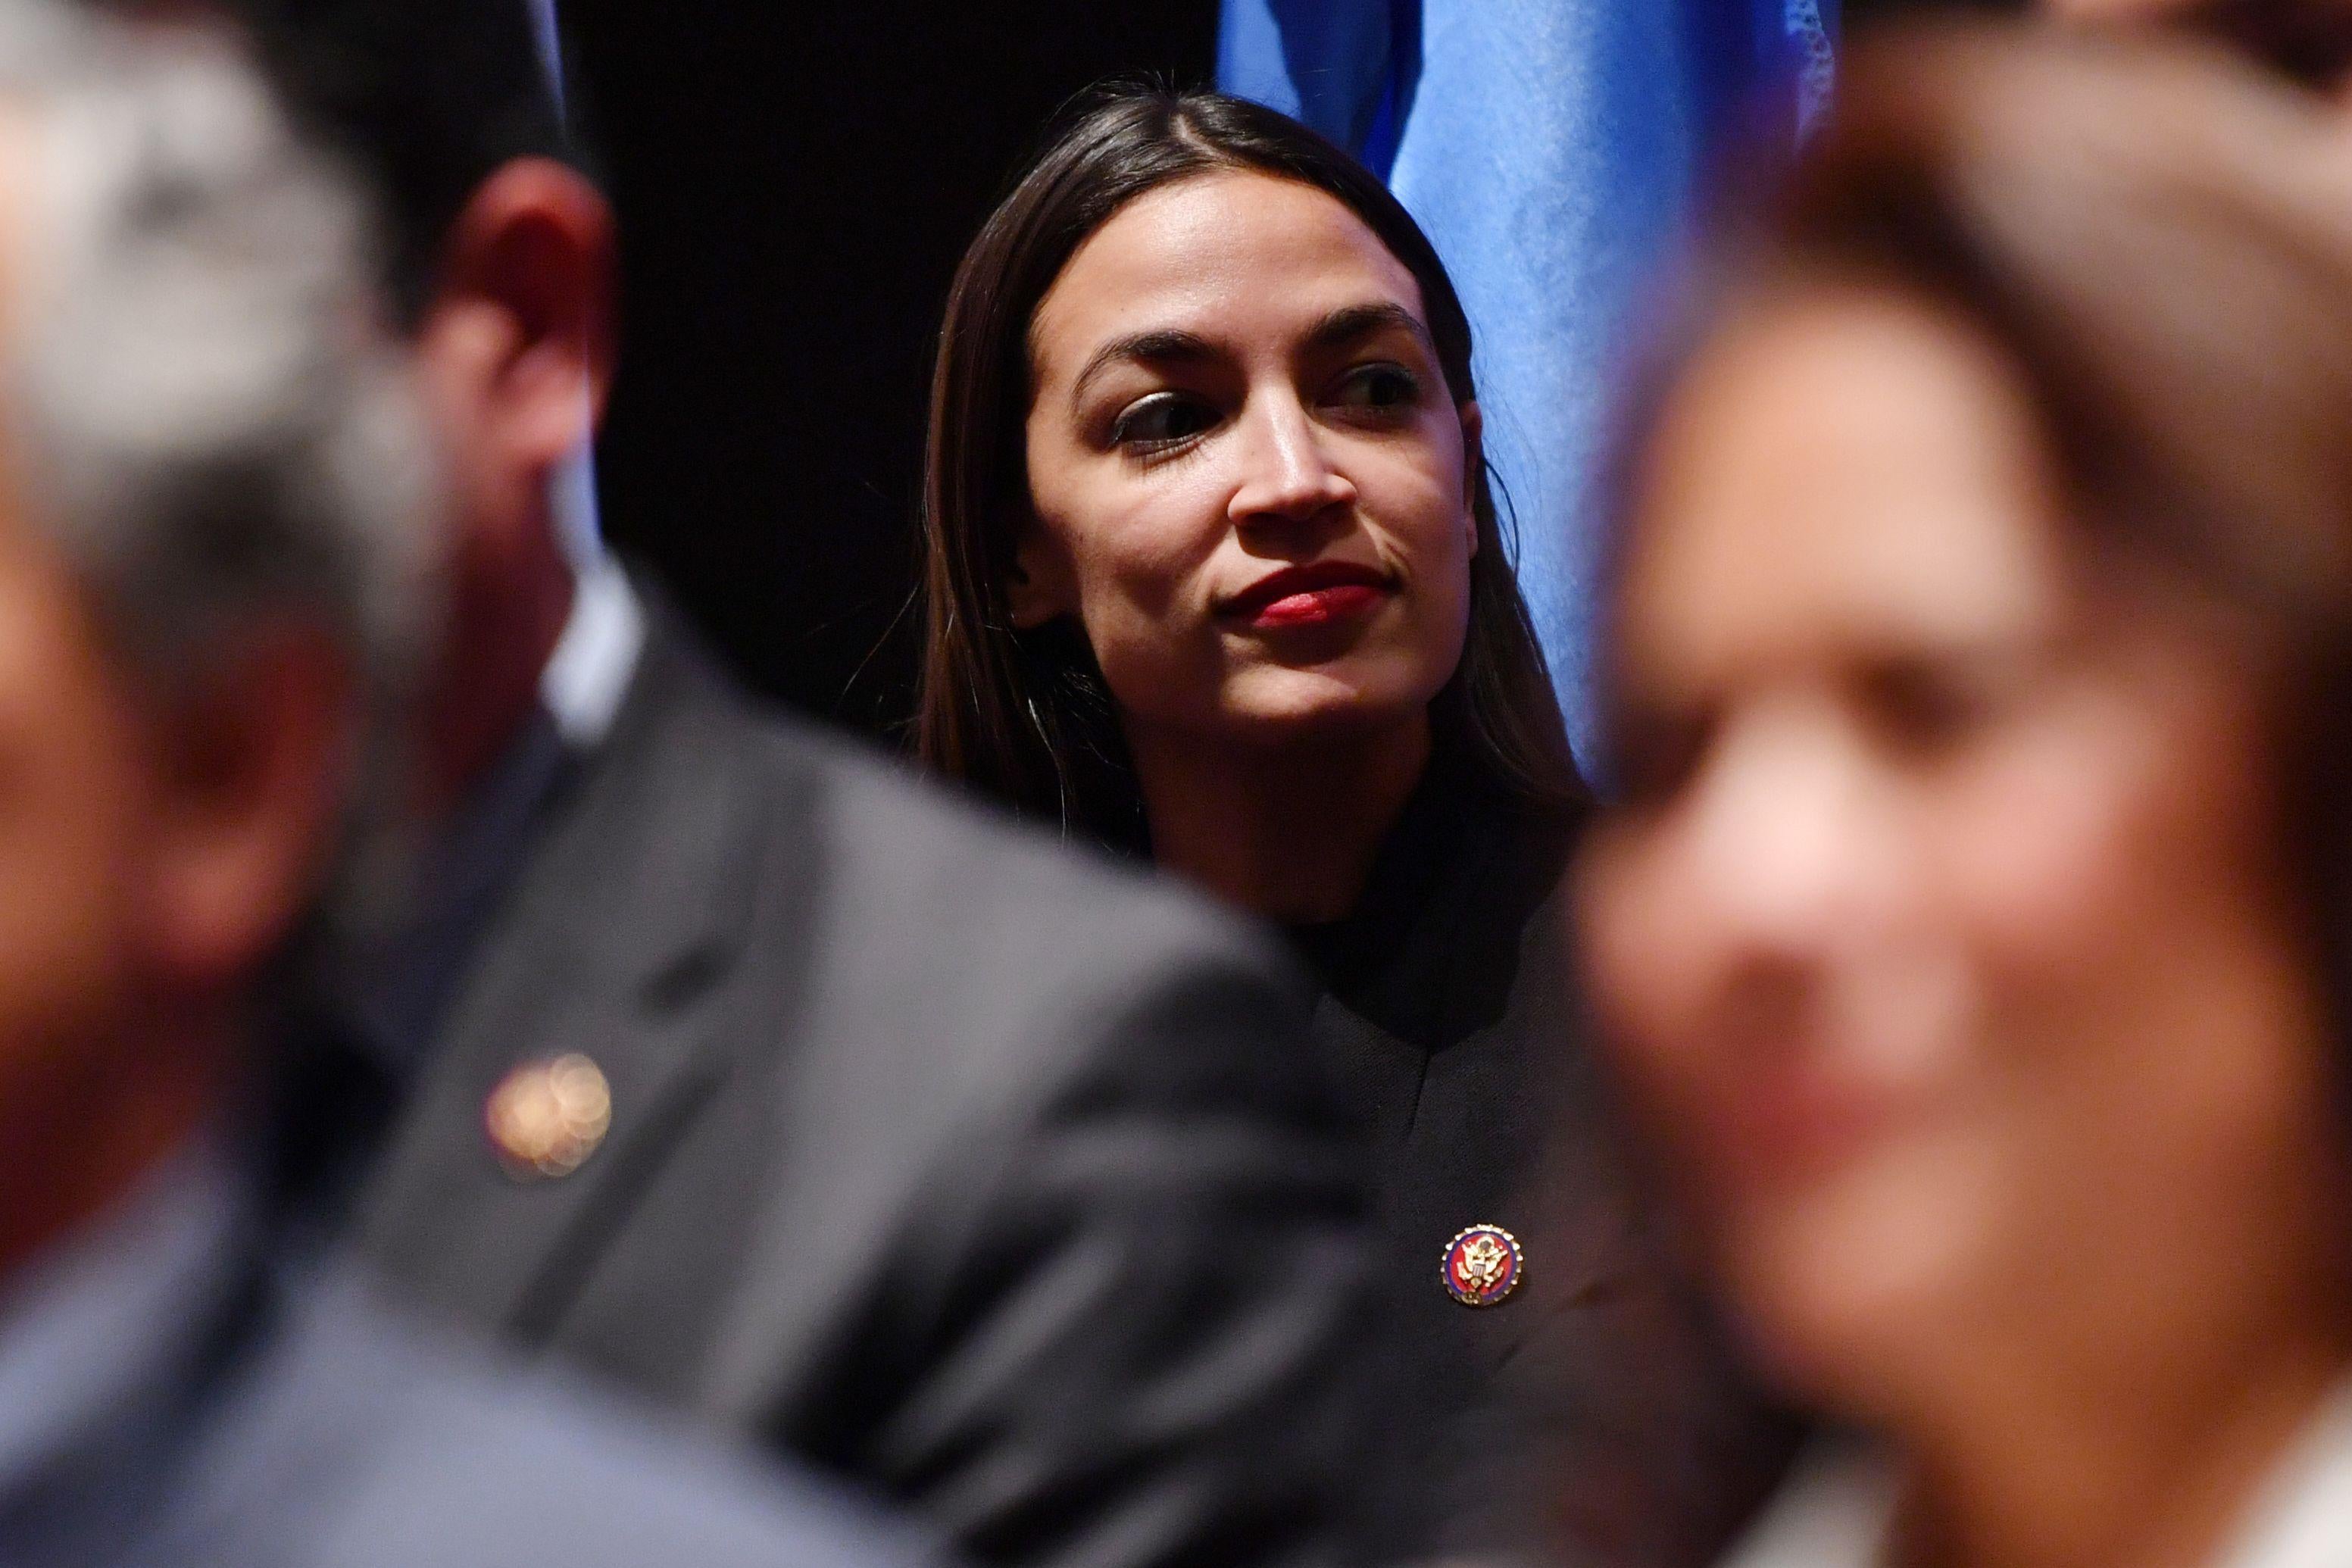 Alexandria Ocasio-Cortez with other members of Congress visible in the foreground.